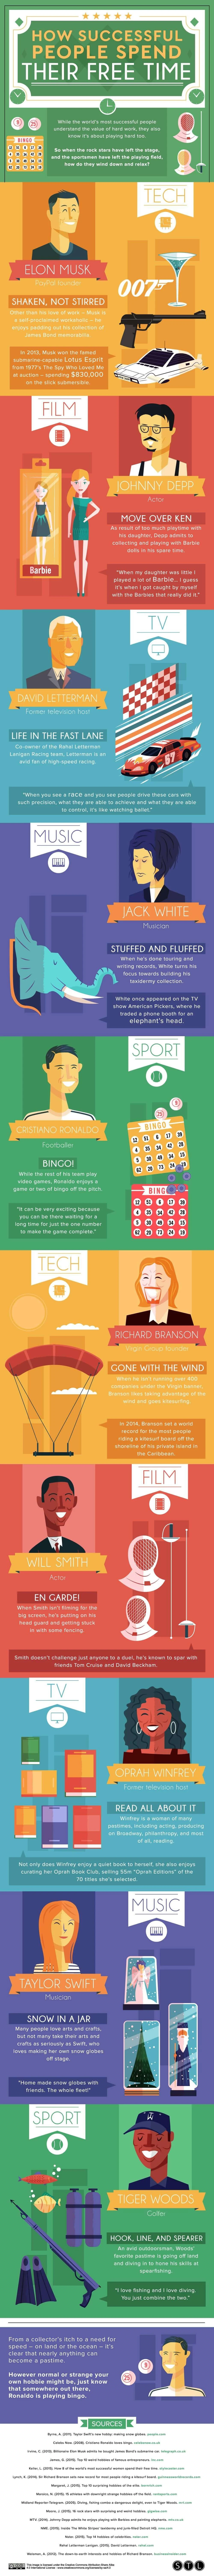 How Successful People Spend Their Free Time - #infographic